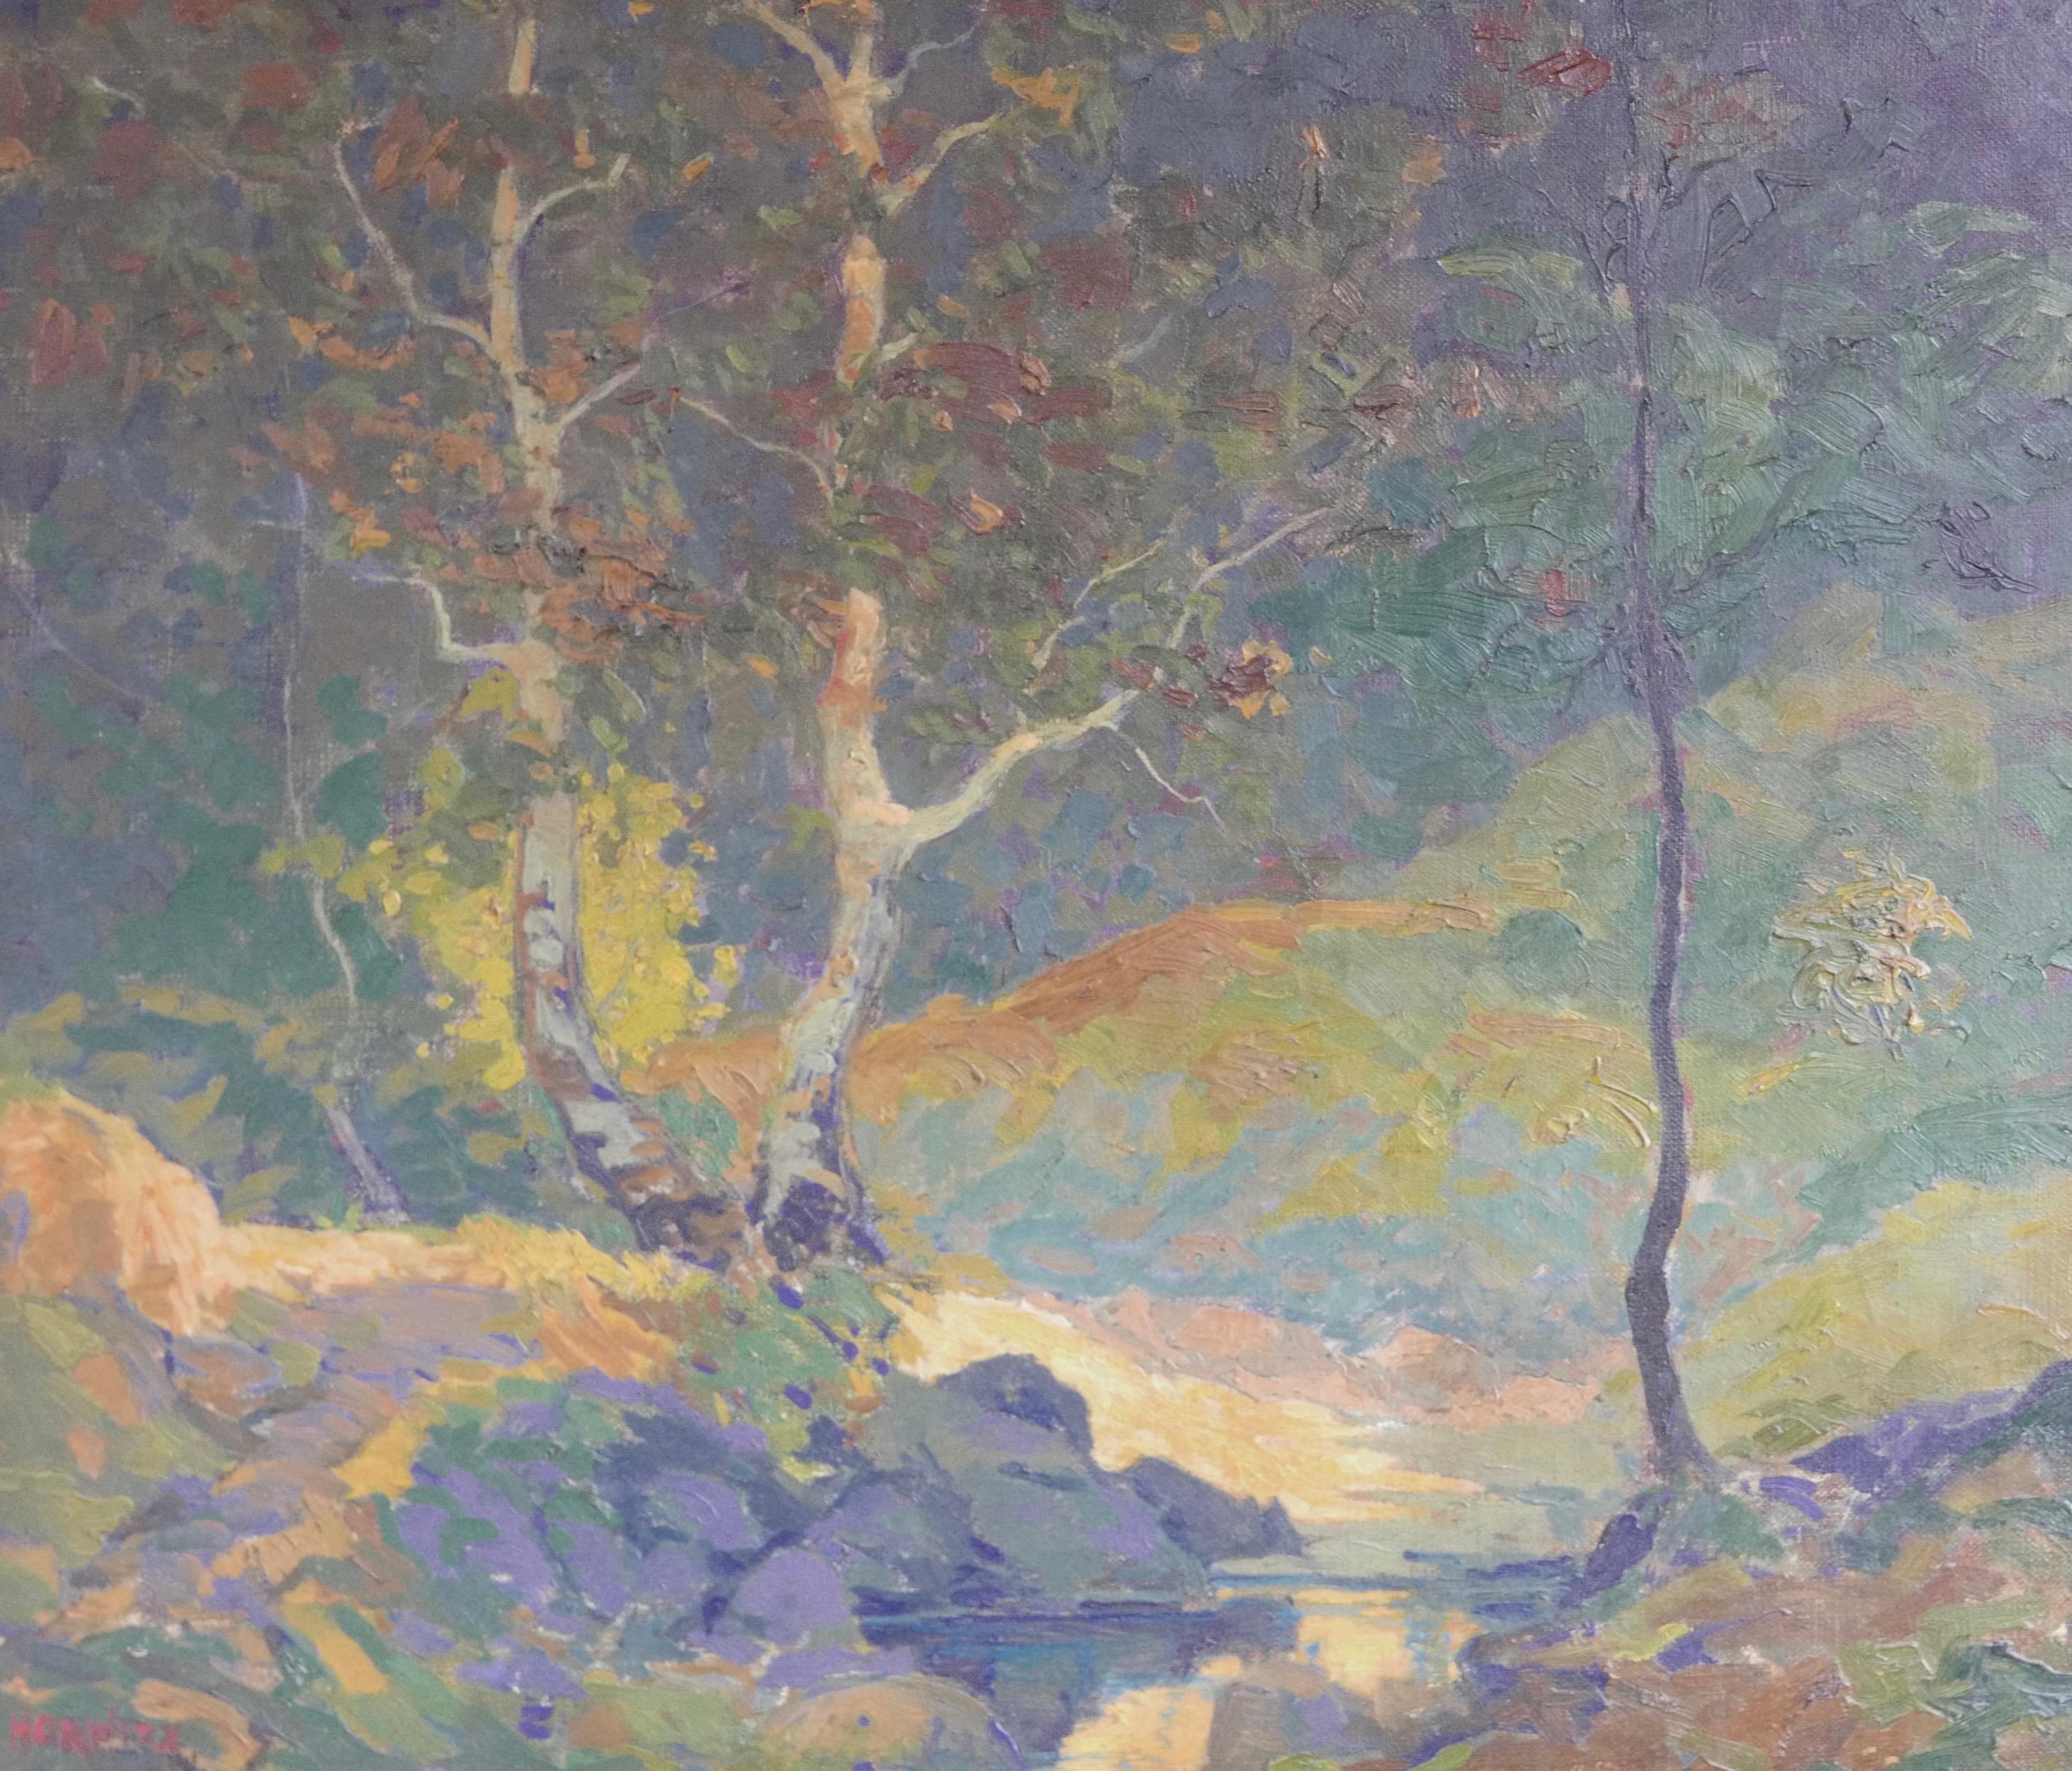 Abstract/ Impressionist Landscape by Russian/American William N. Horwitz, c 1924 2